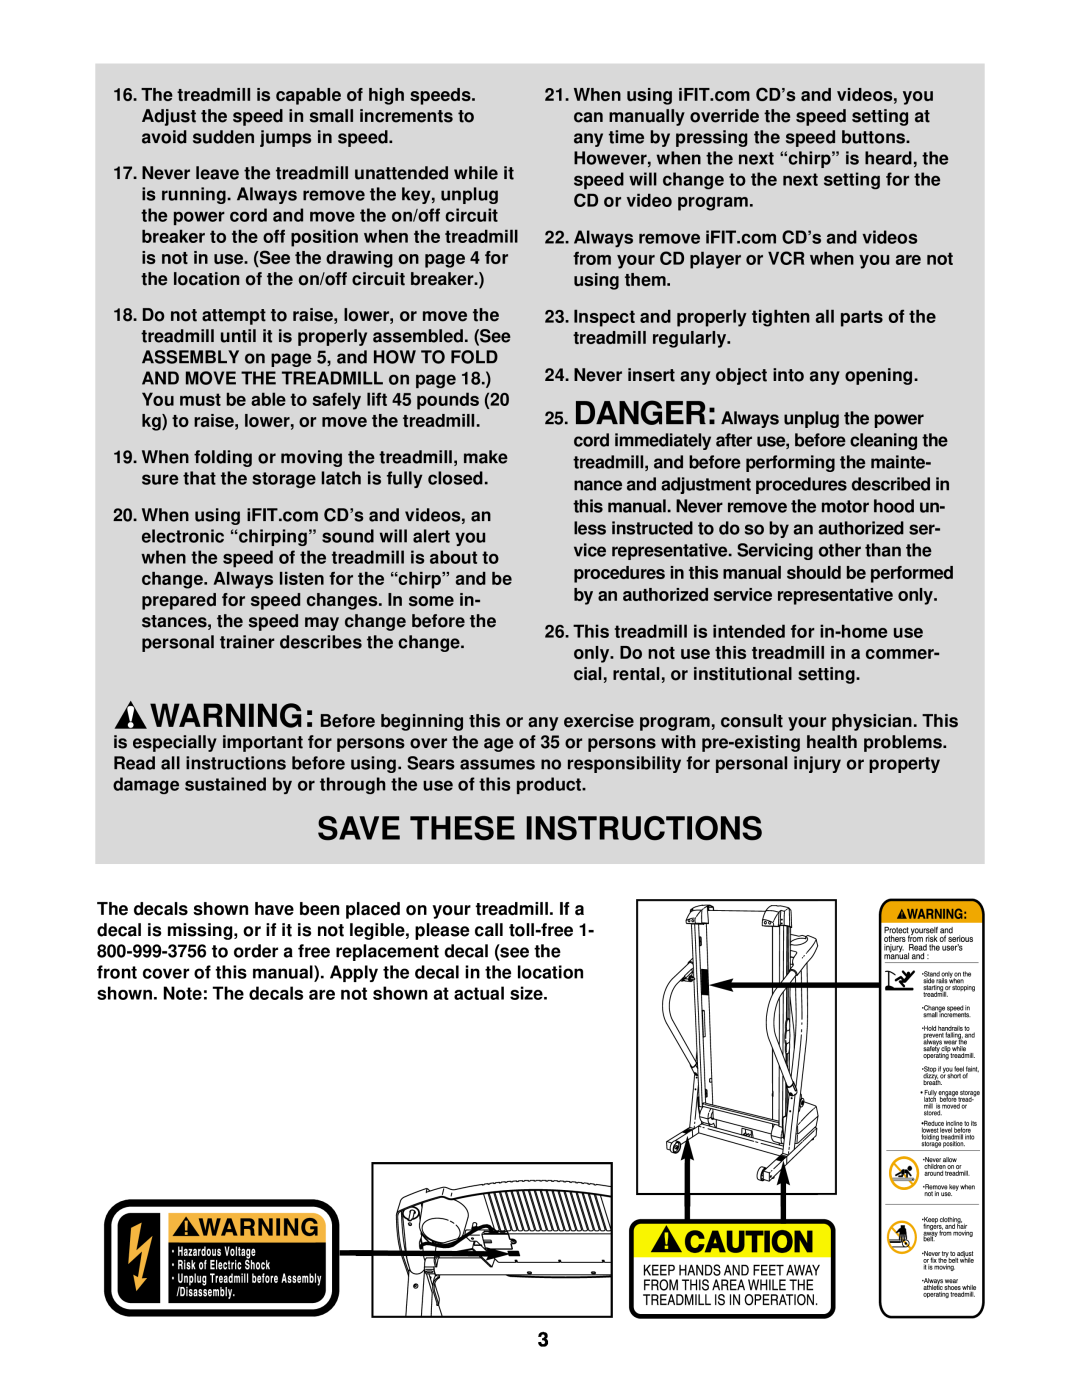 ProForm 831.293040 user manual Save These Instructions, Inspect and properly tighten all parts of the treadmill regularly 